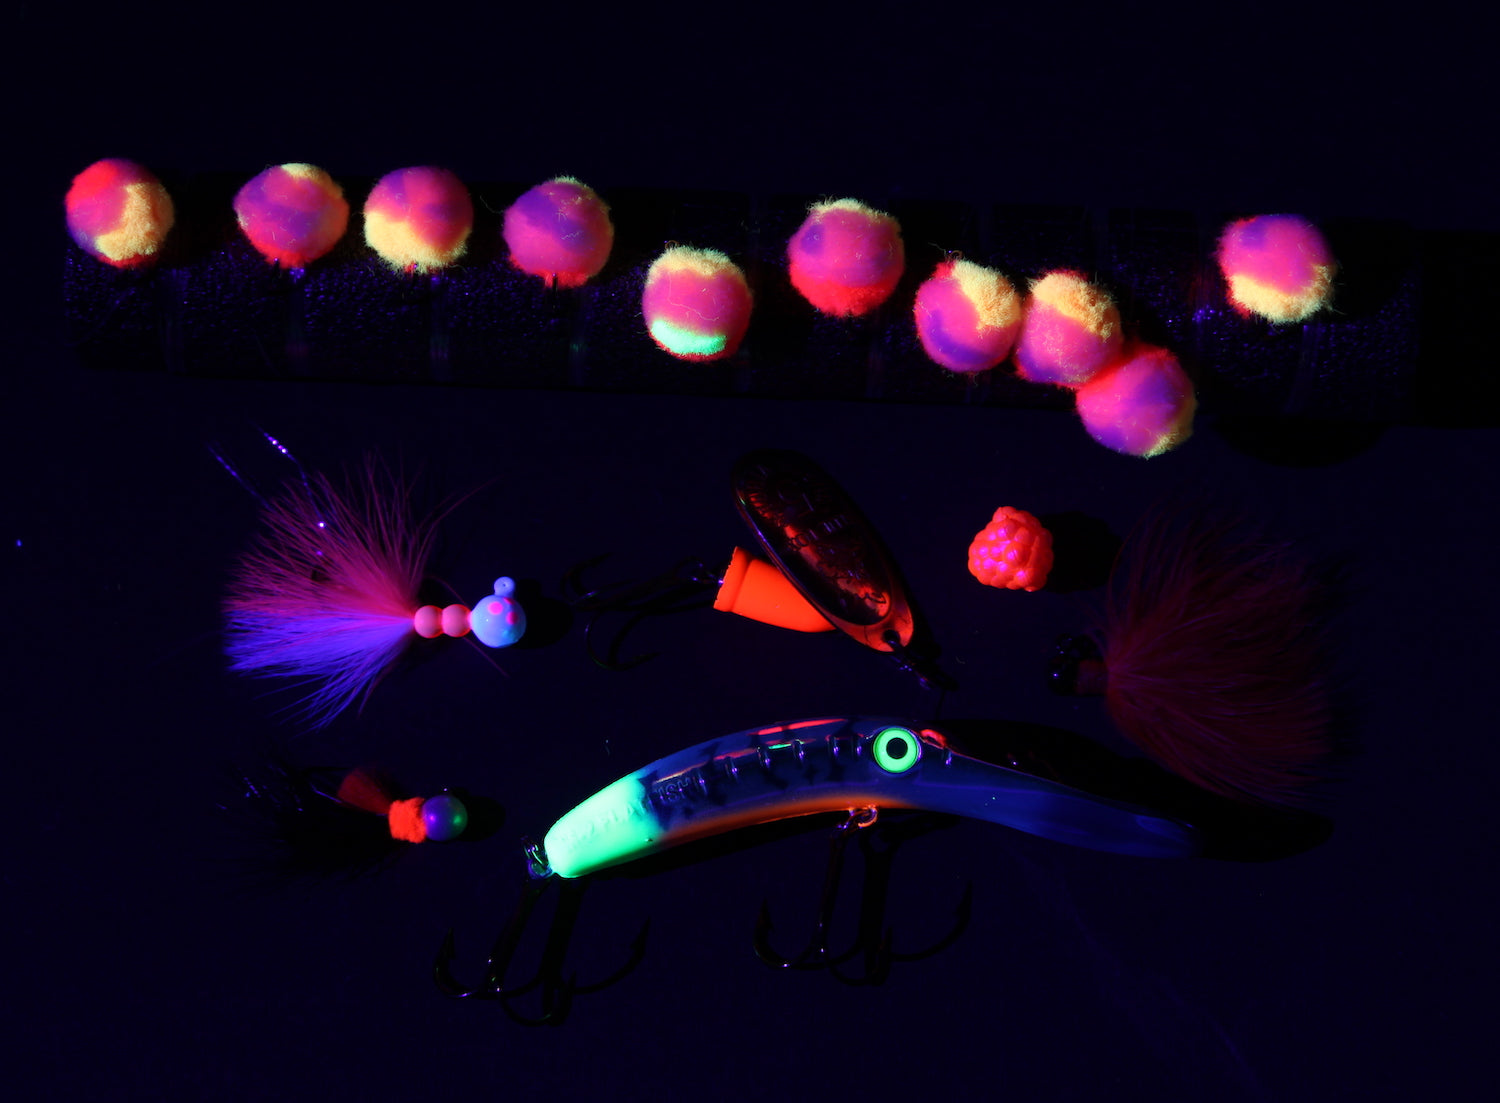 Night Shop Lure - Night Shop Lure updated their cover photo.